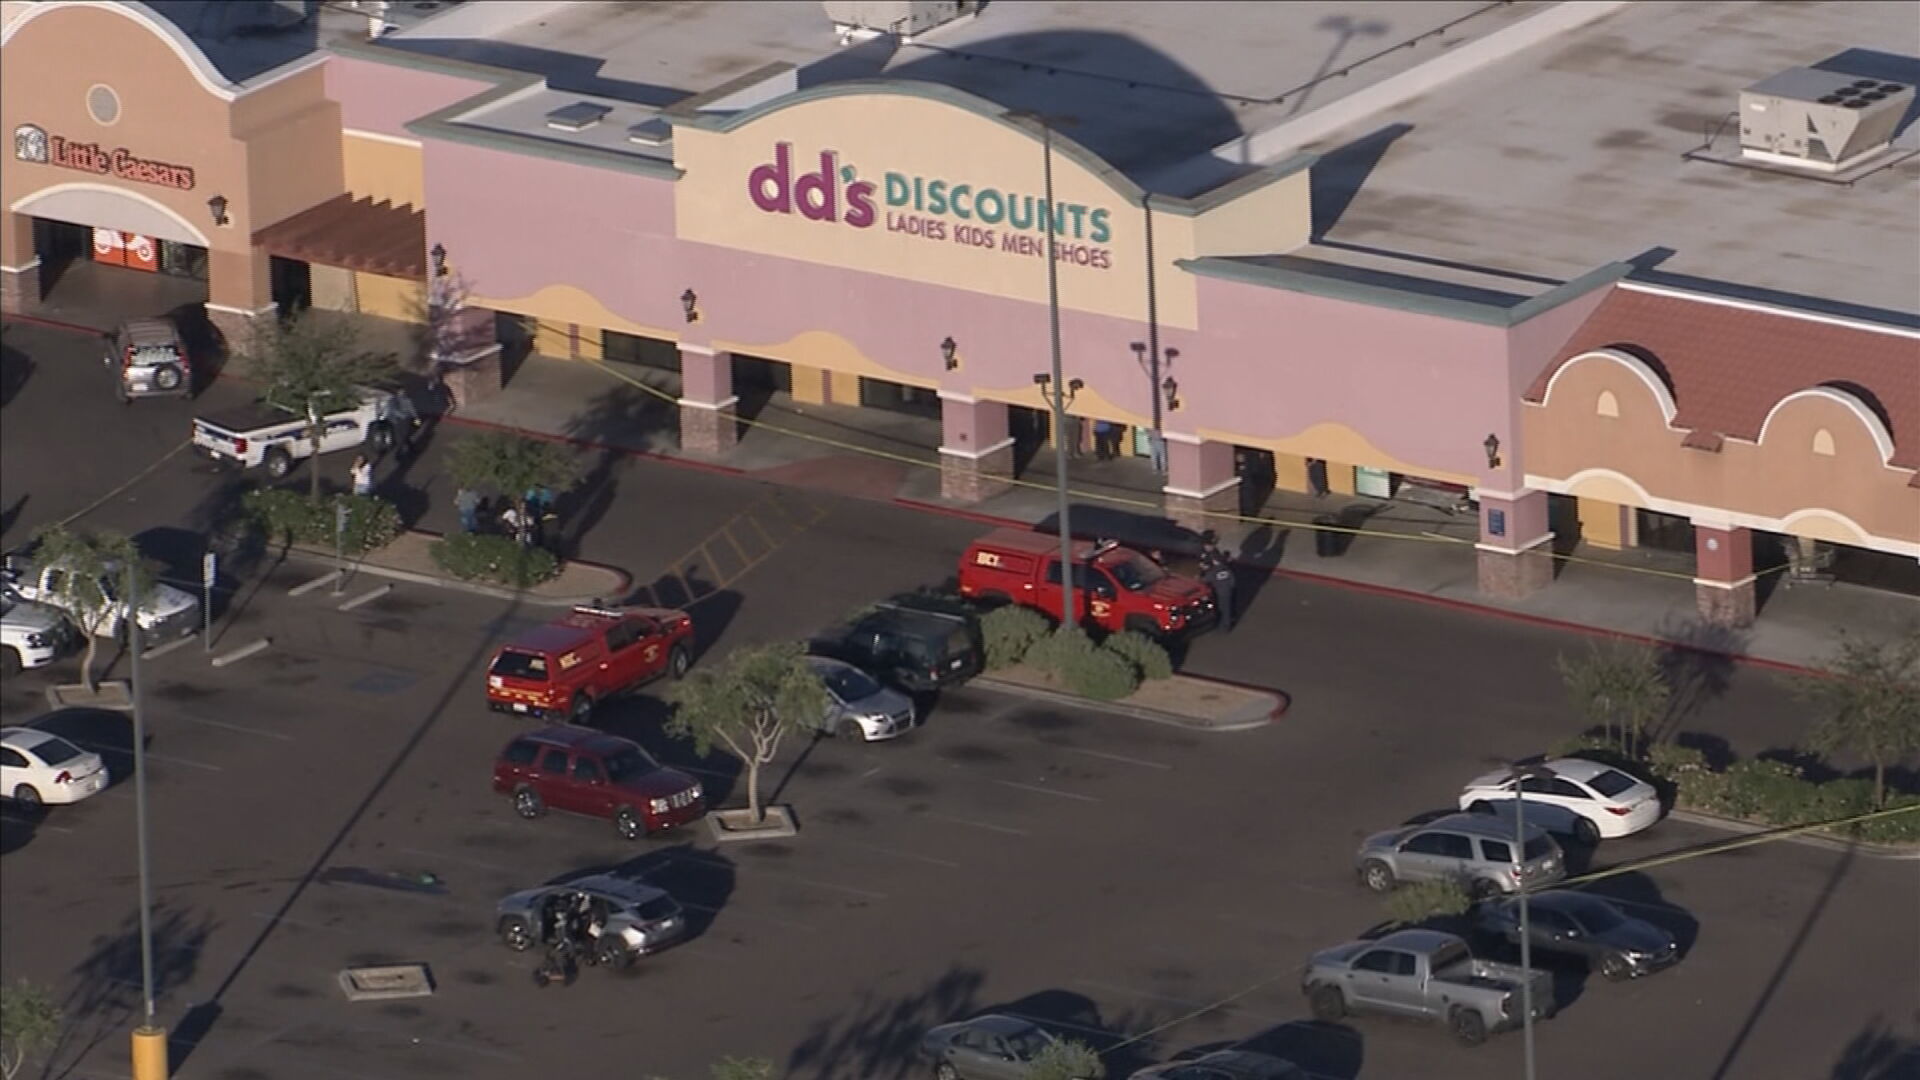 Driver who crashed in Phoenix store reportedly intoxicated, police say